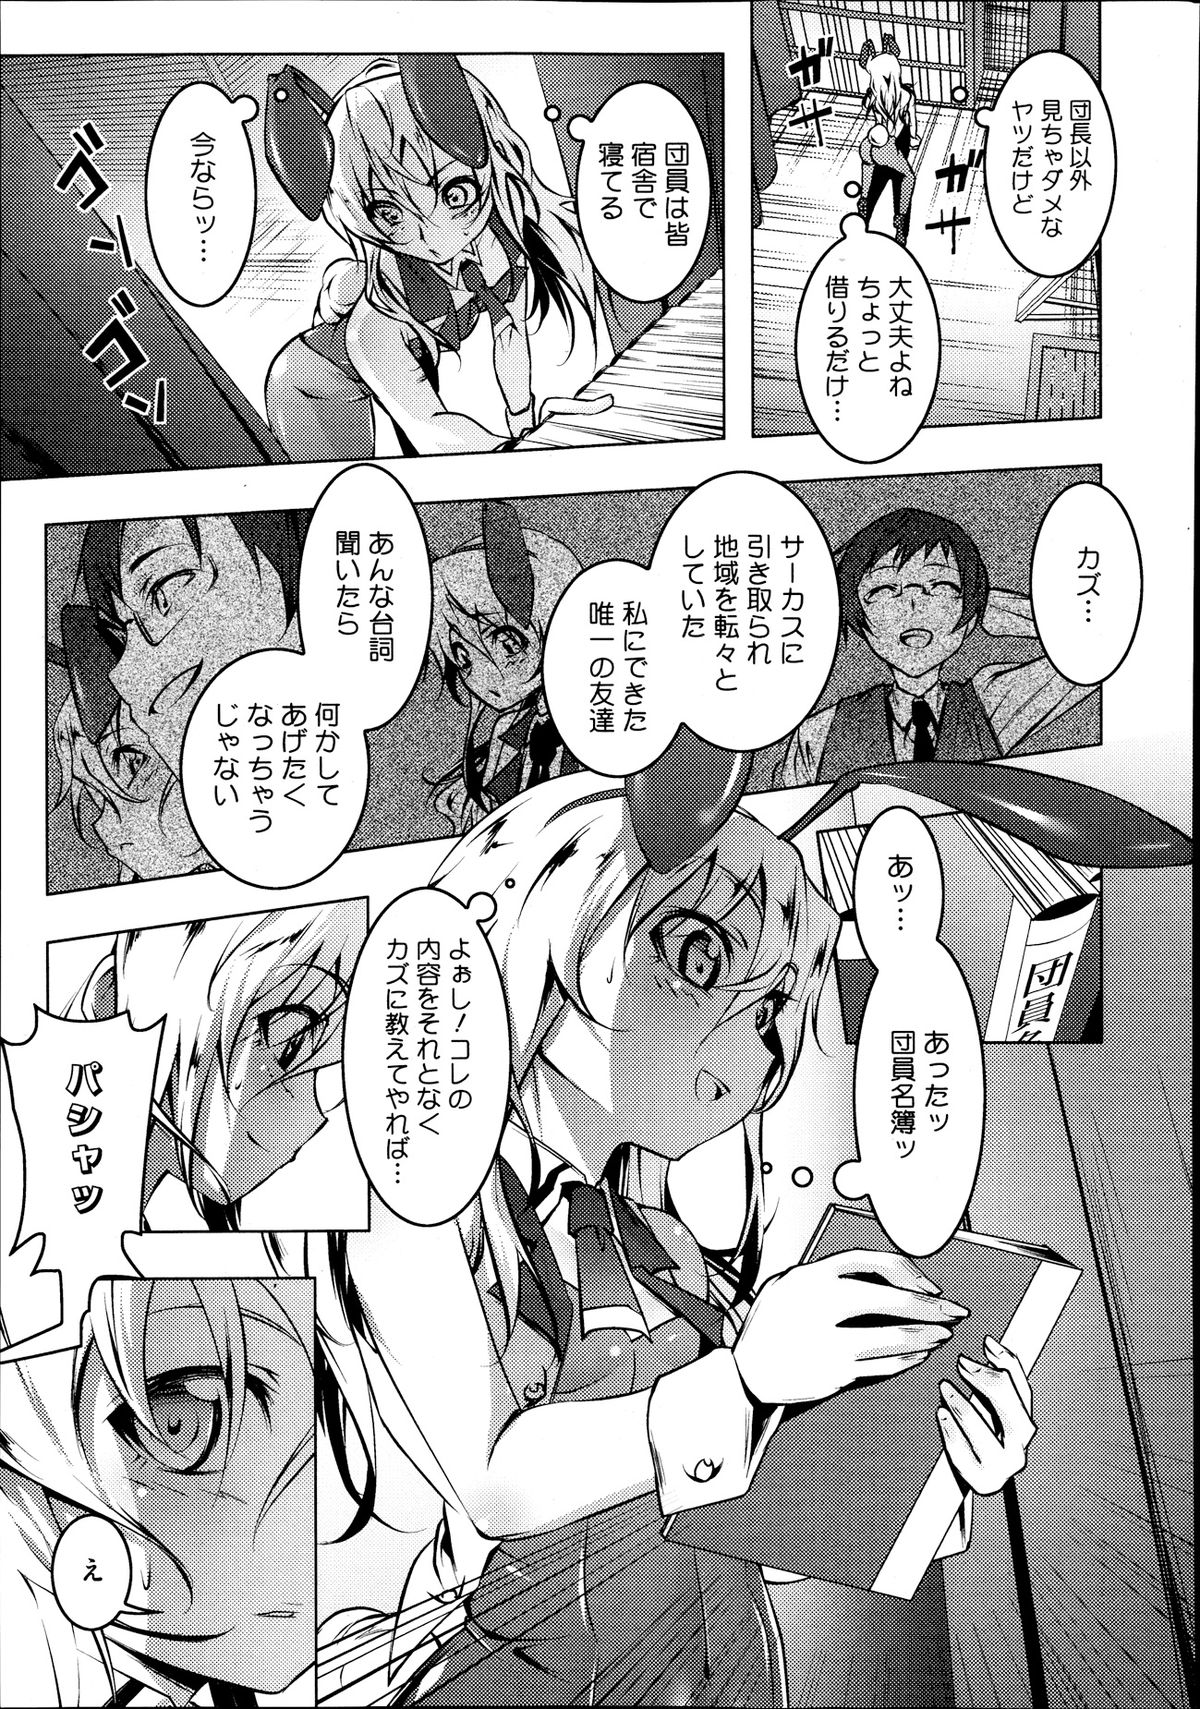 [Tanabe Kyo] Domestic 1+2 page 5 full